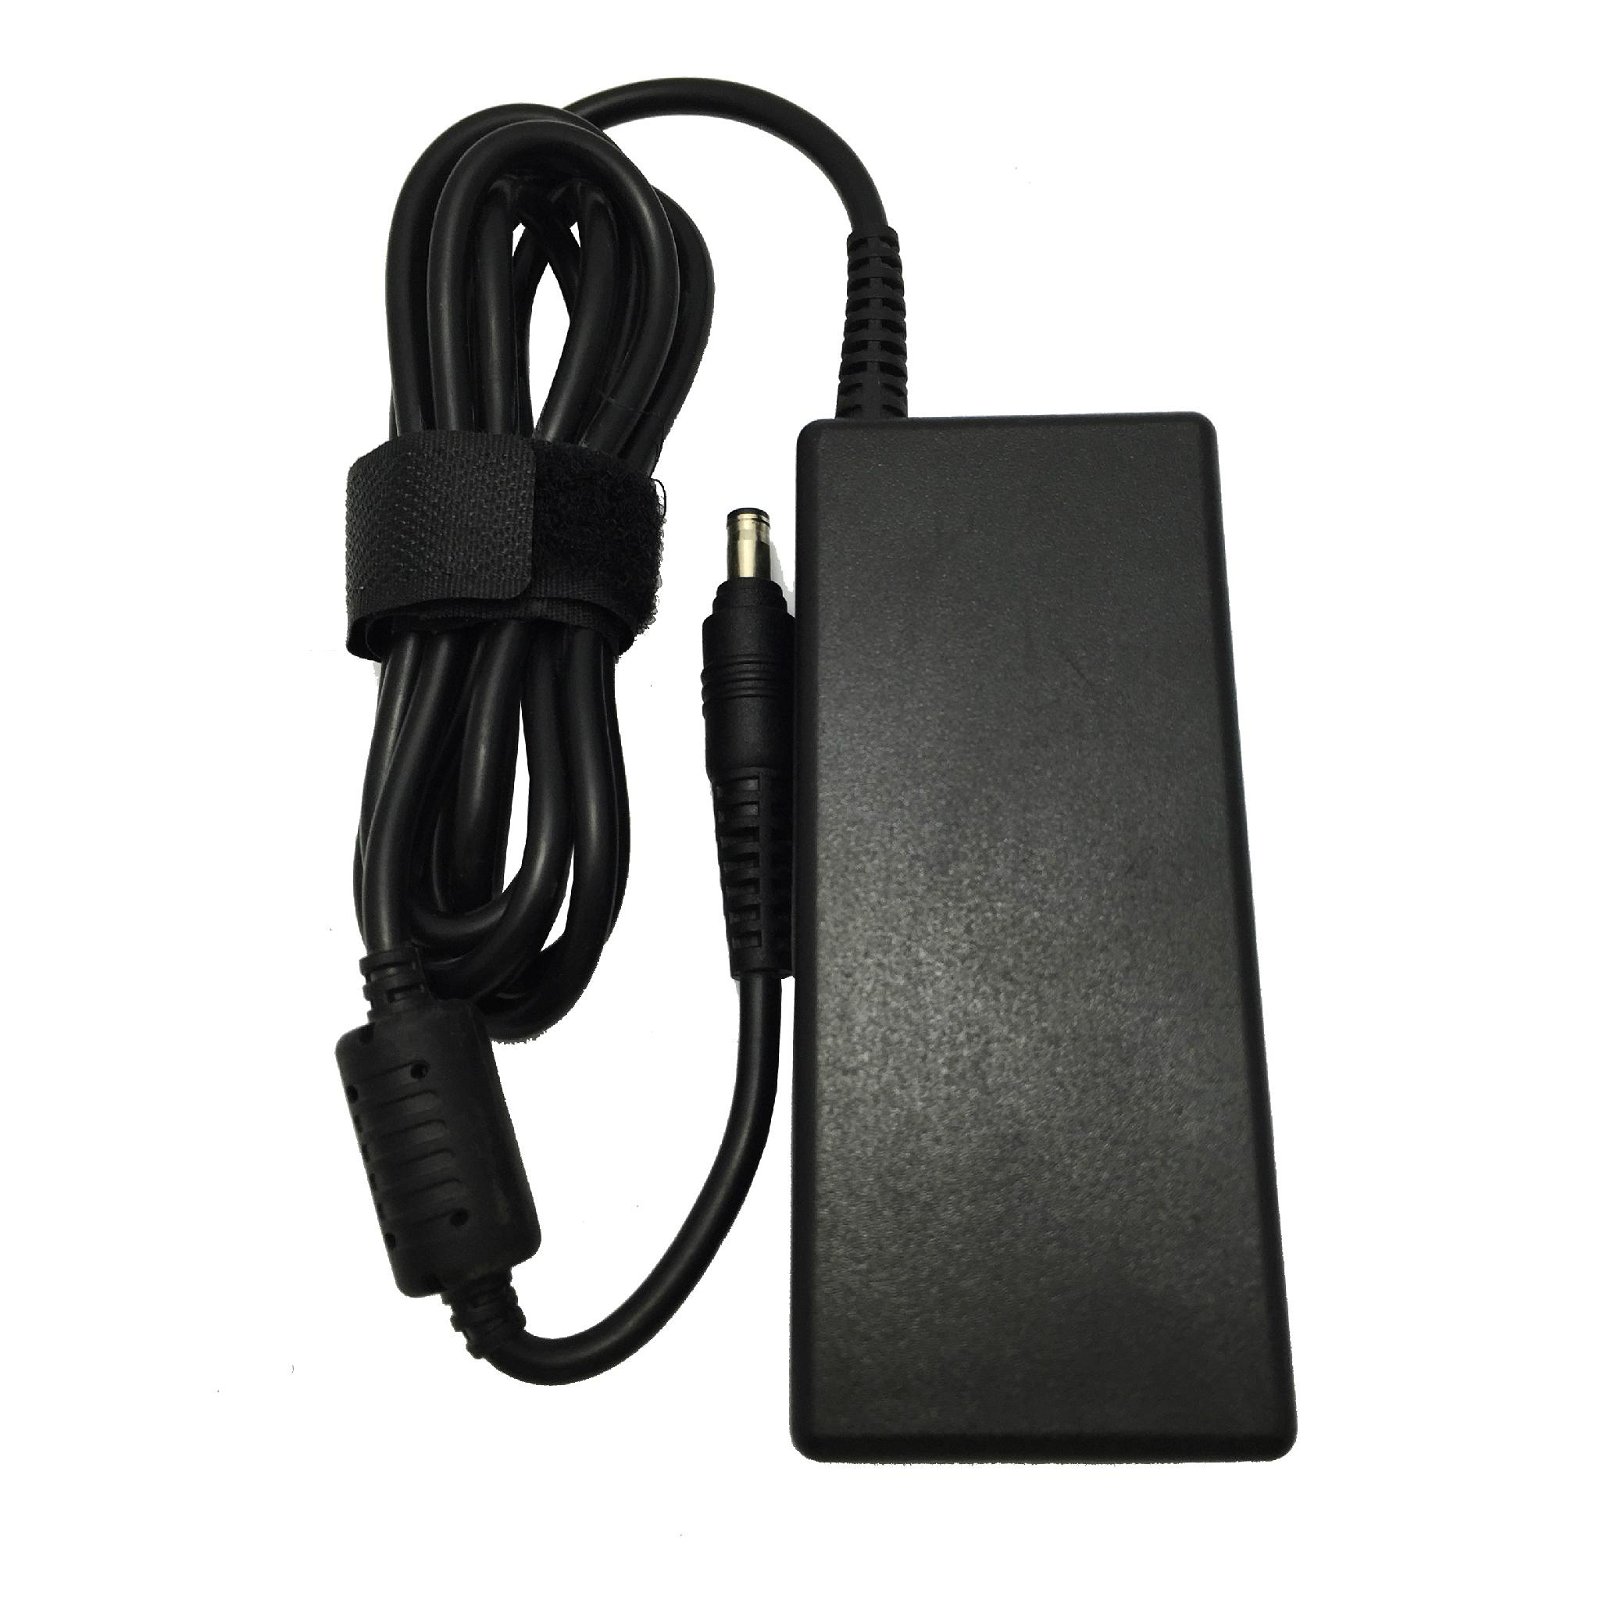 Laptop AC Power Adapter Charger 19v 3.16a 60w for Samsung 3